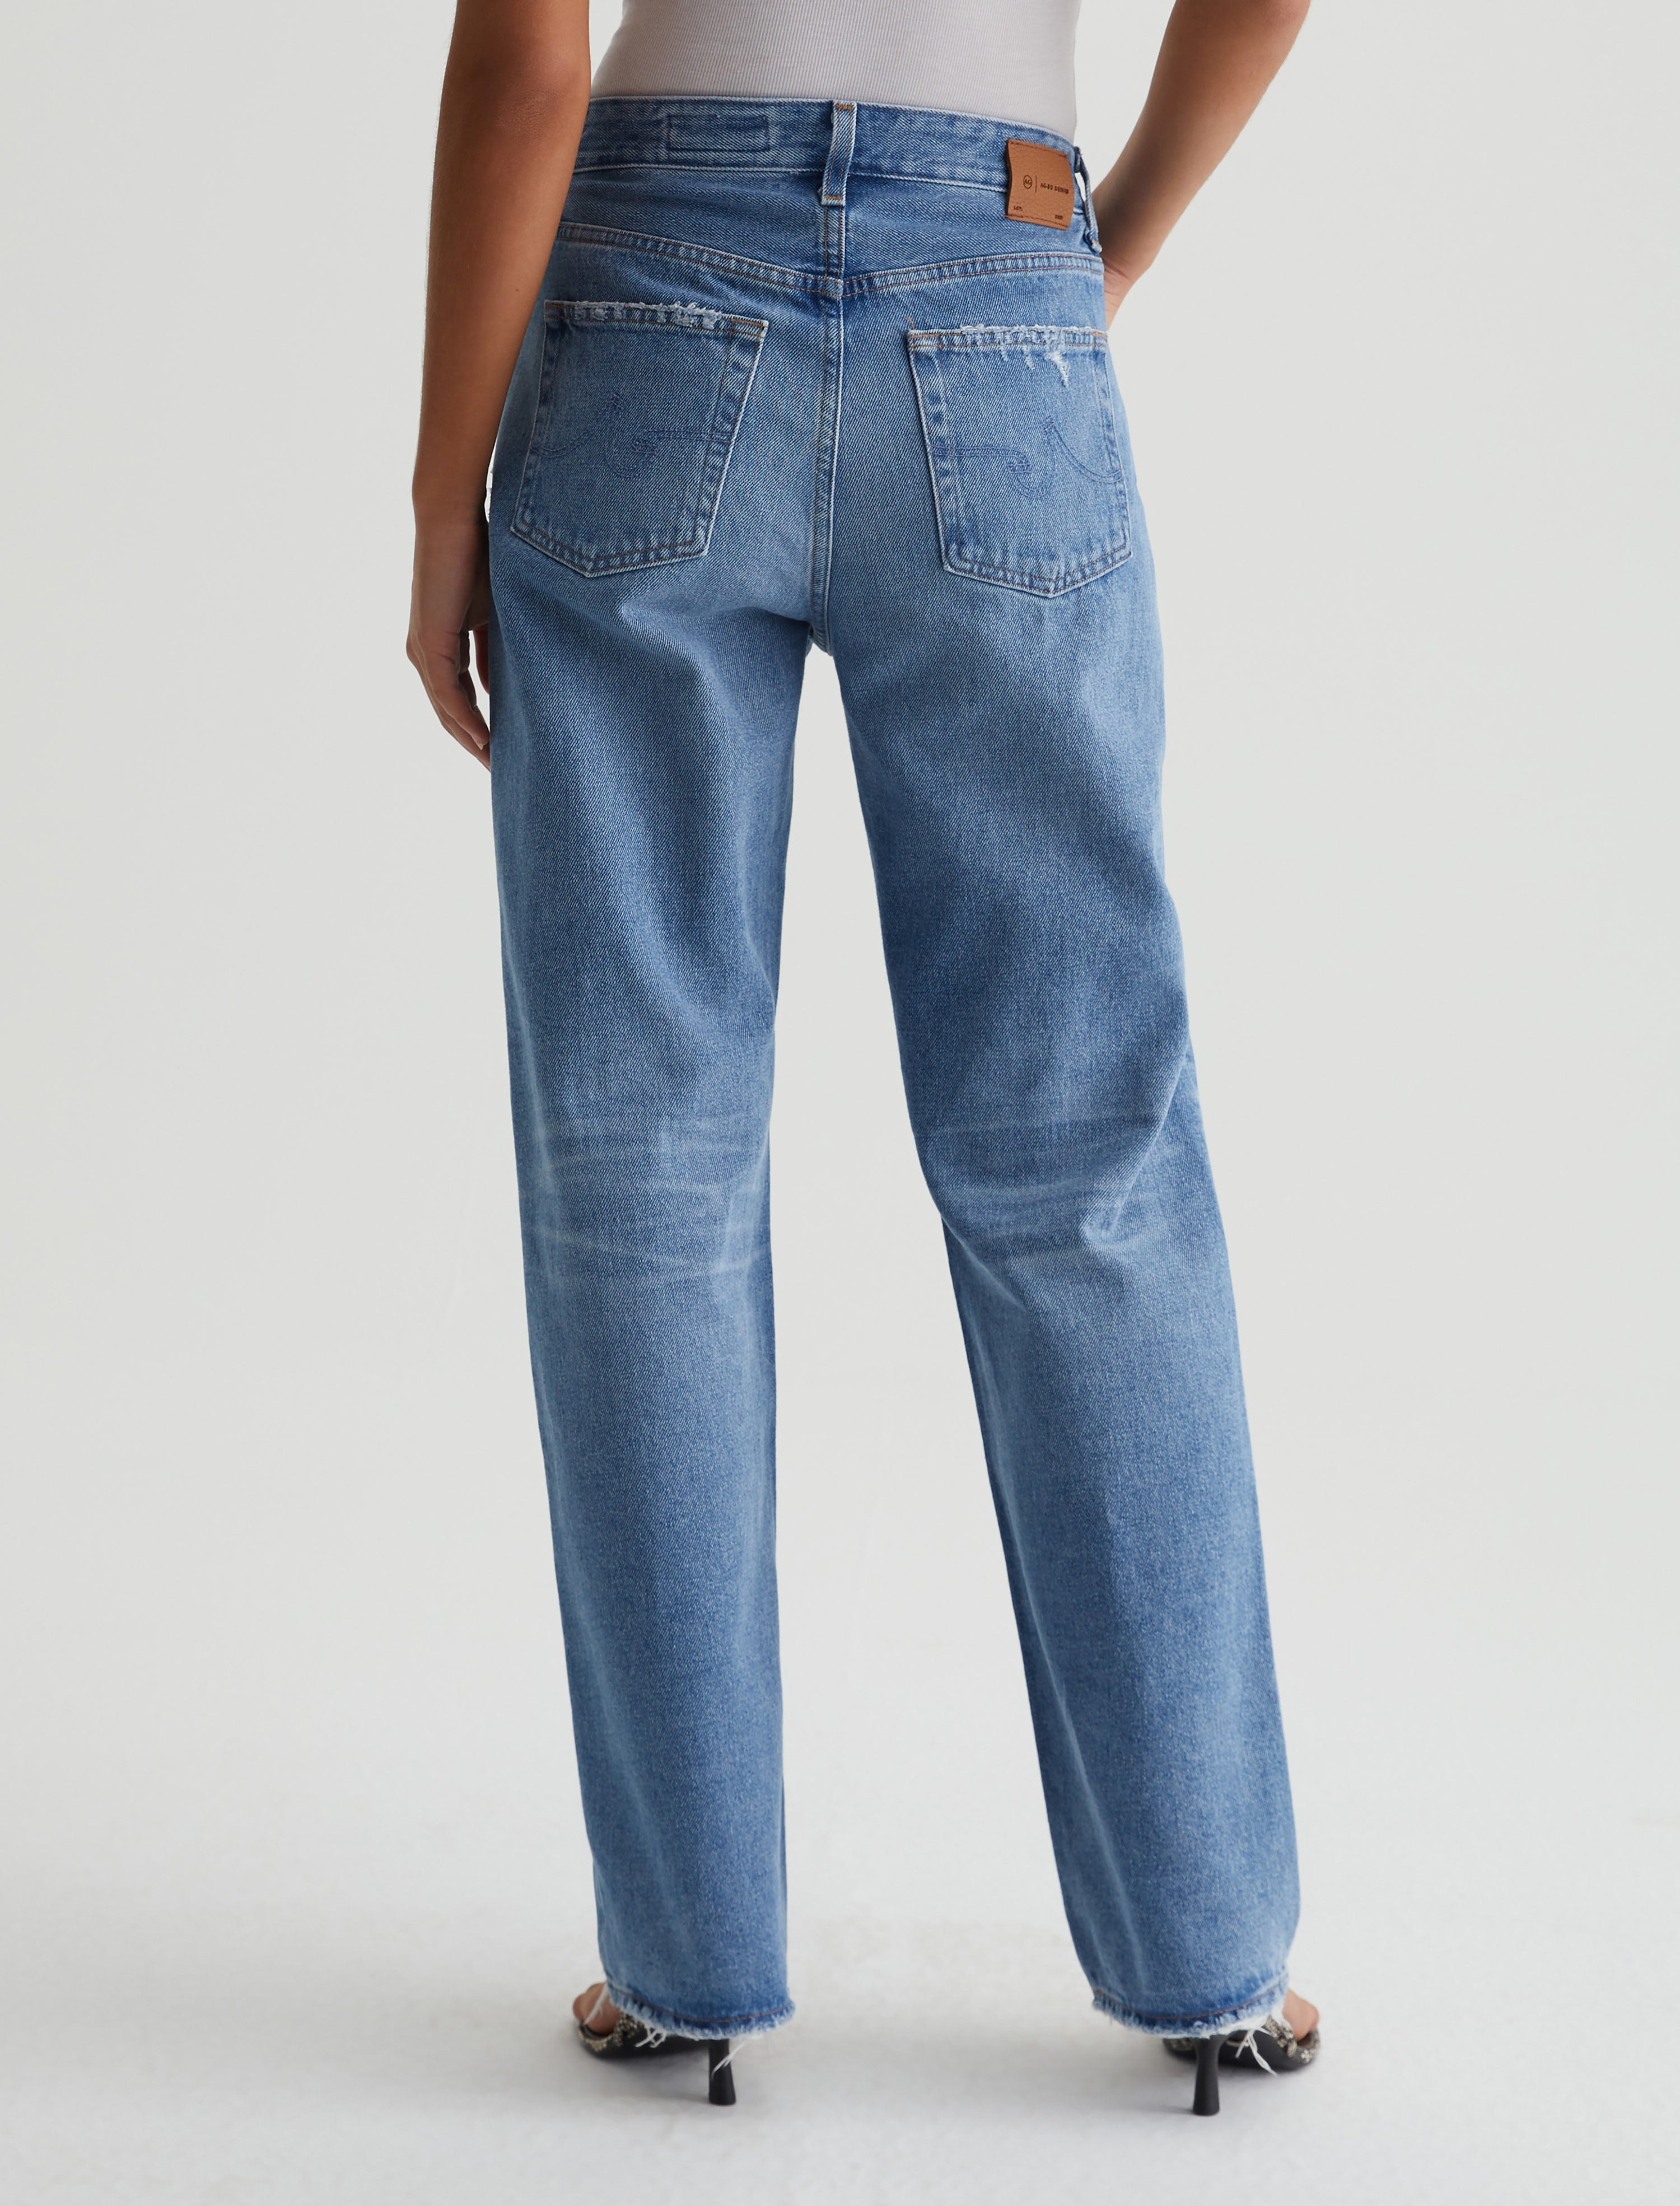 Womens Rian 18 Years Creekside at AG Jeans Official Store